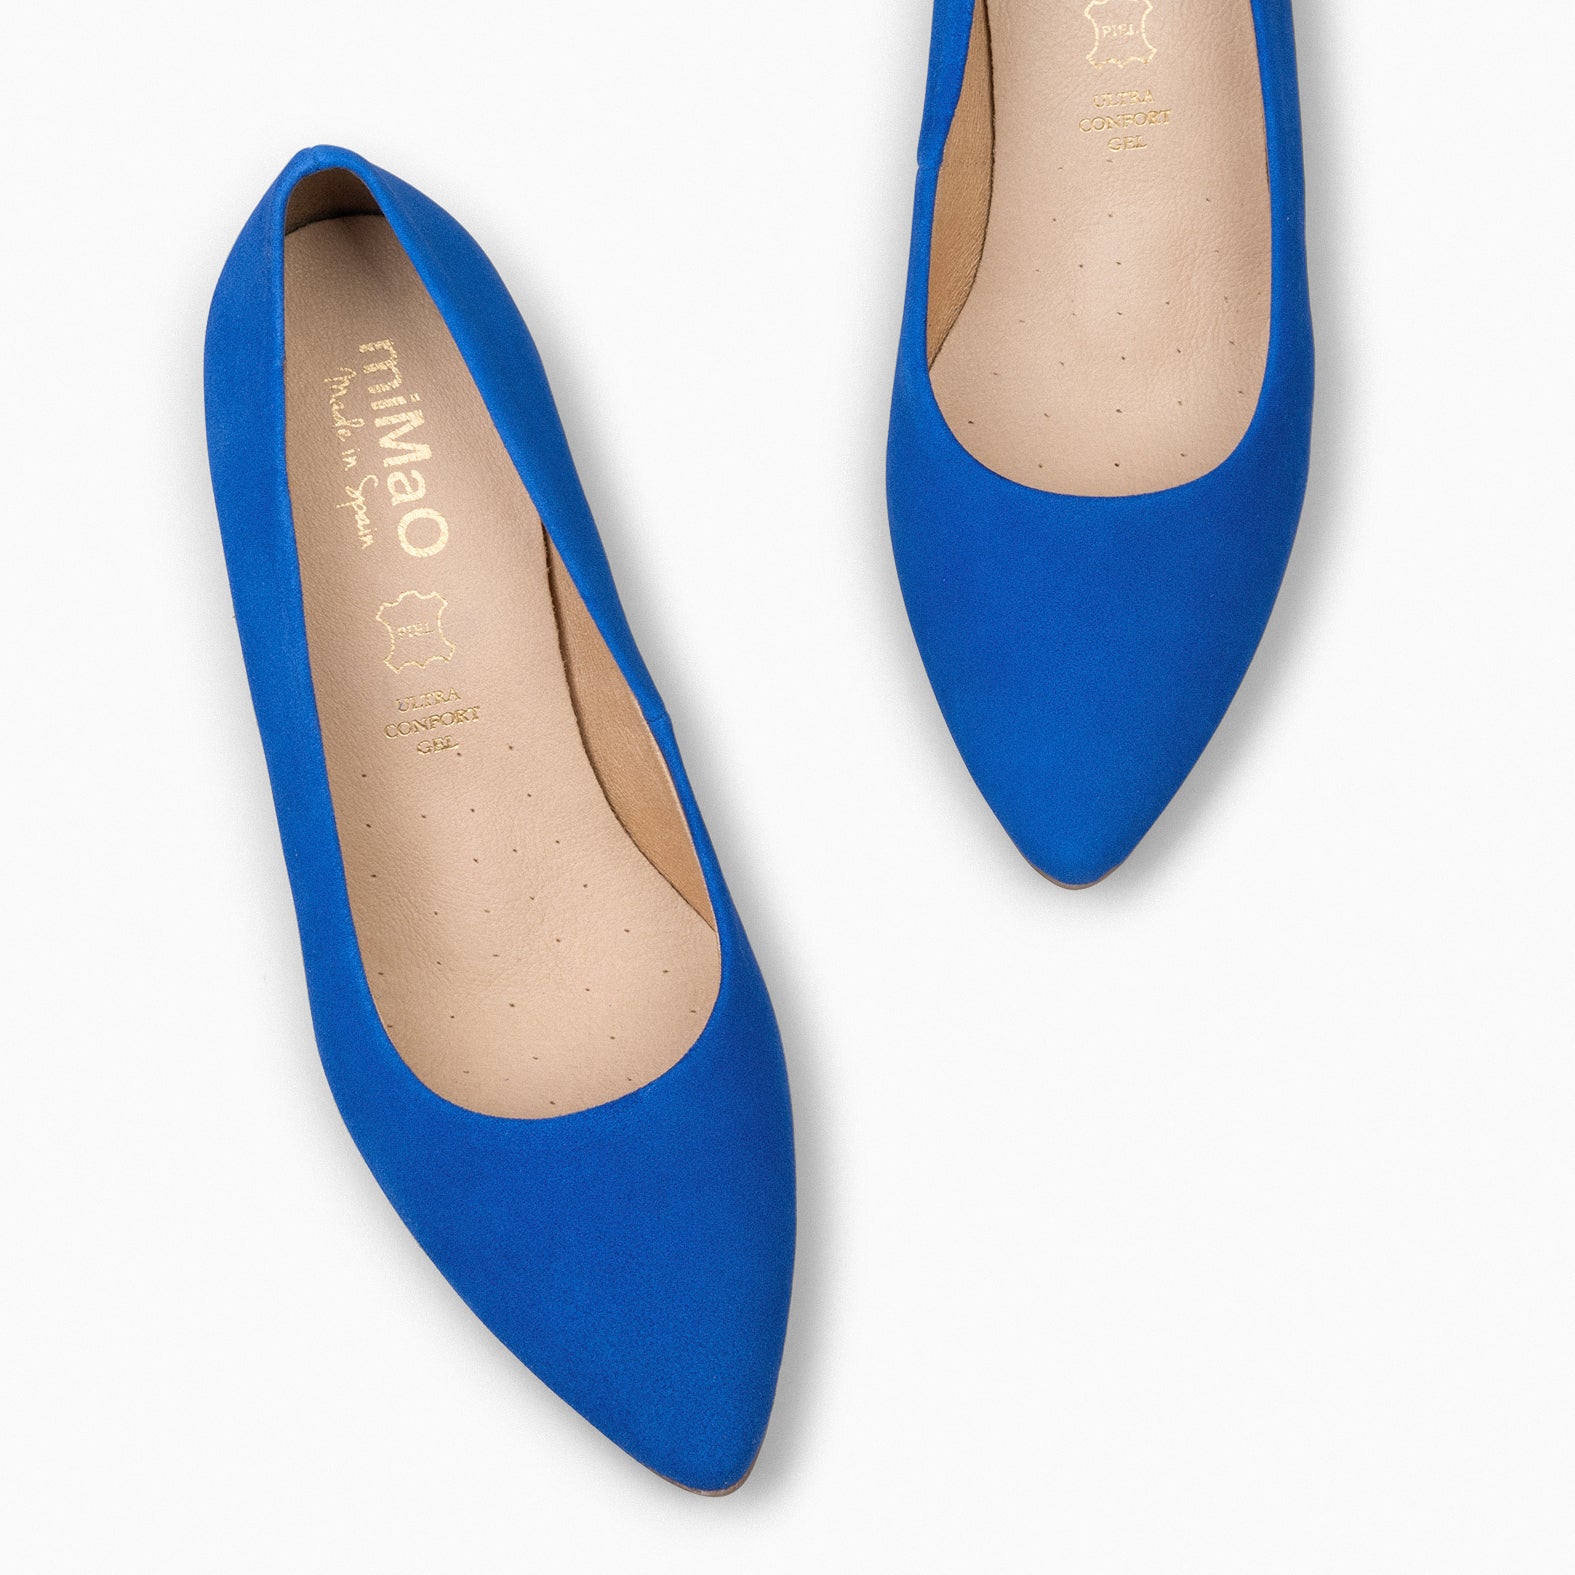 URBAN S – ELECTRIC BLUE Suede Mid-Heeled Shoes 